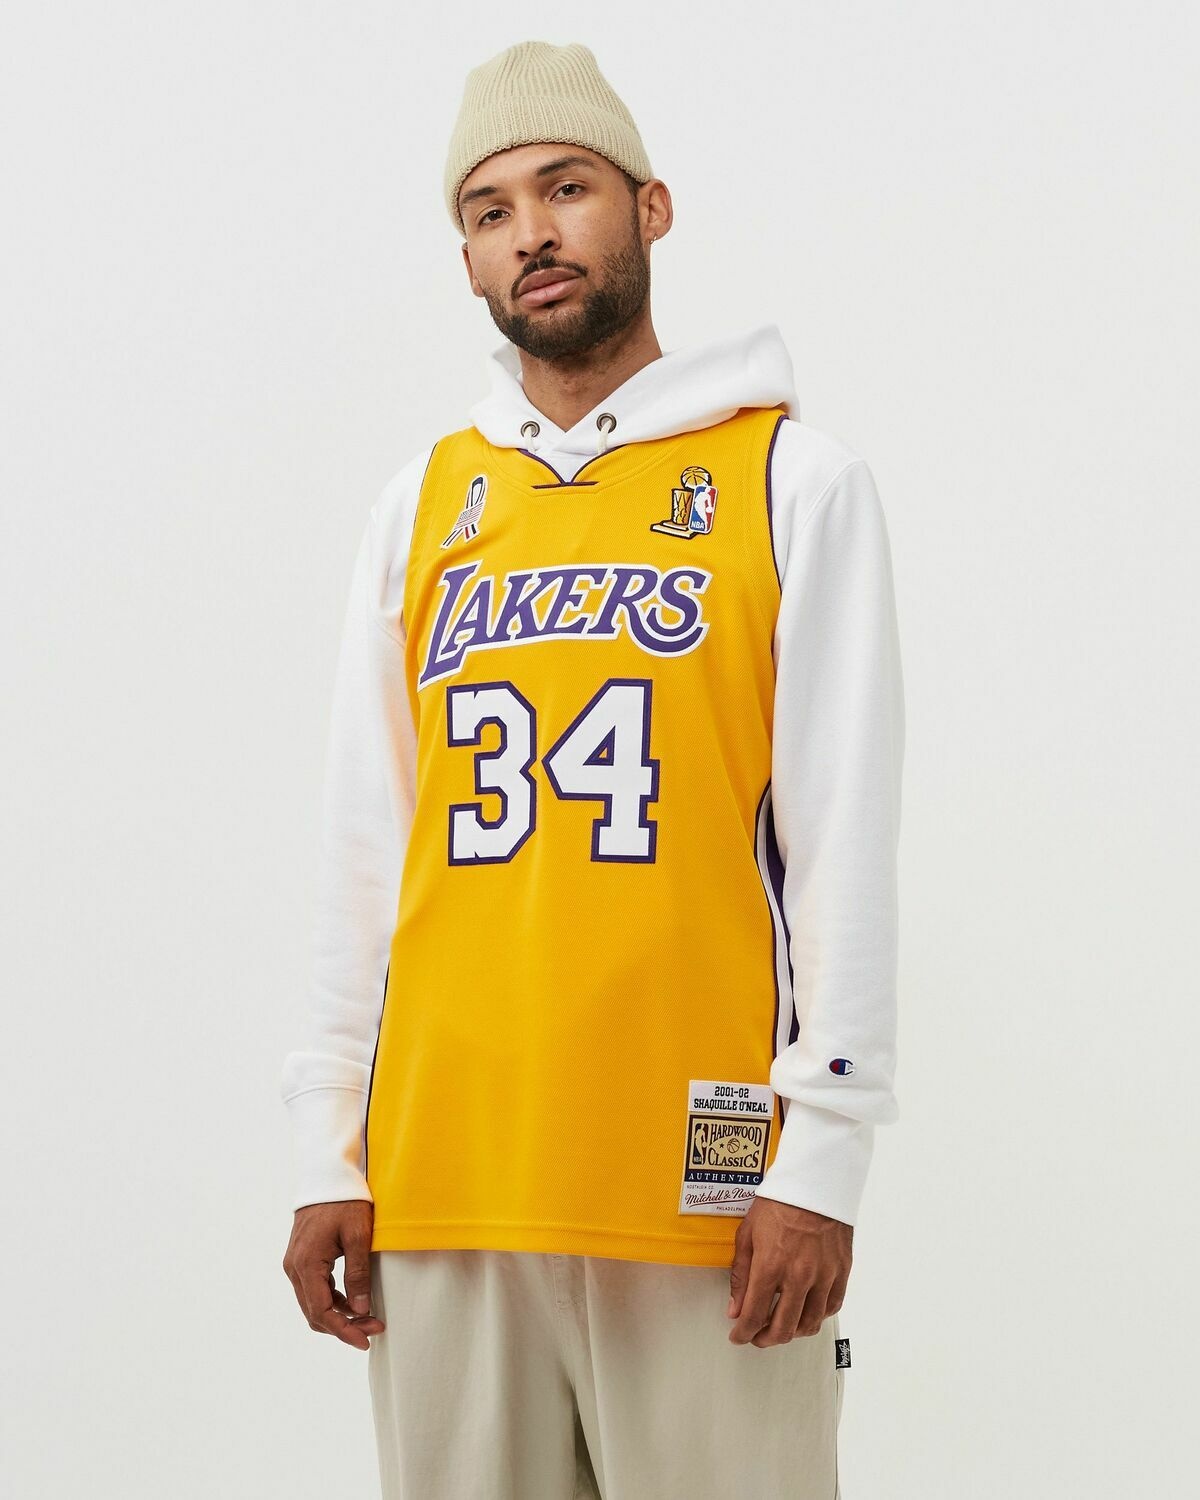 Mitchell & Ness Nba Authentic Jersey La Lakers 2001 02 Shaquille O'neal #34 Yellow - Mens - Jerseys